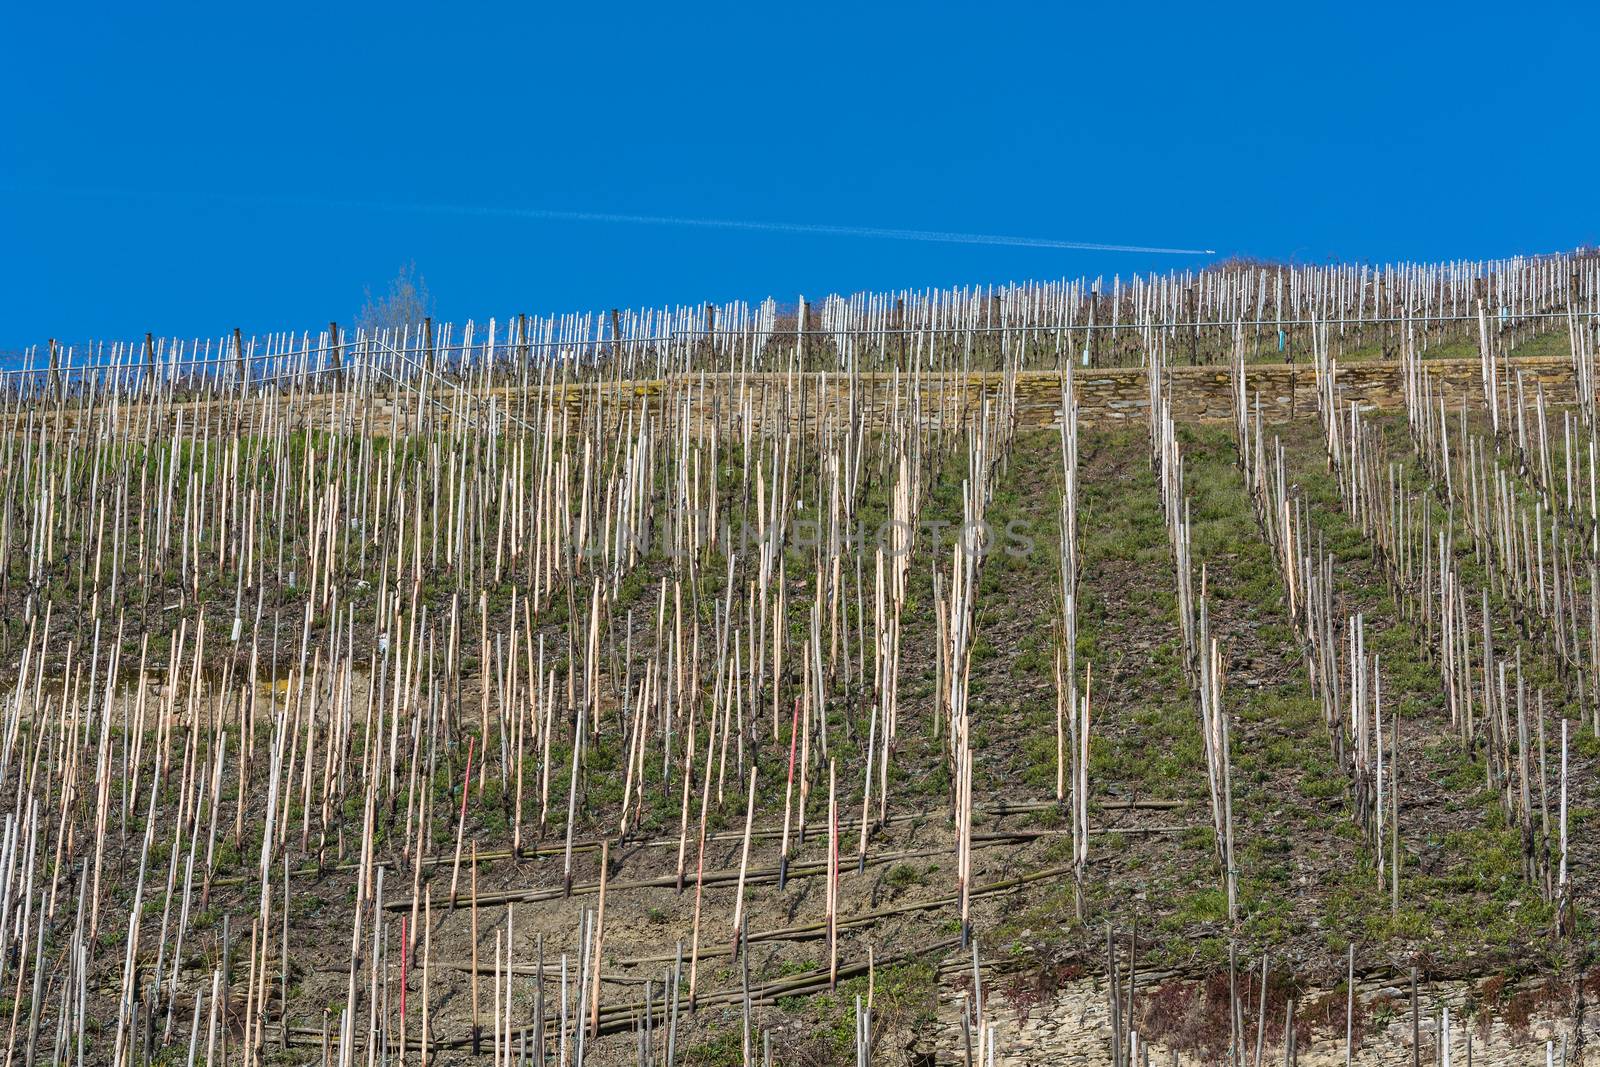 Vineyards on the Moselle against a blue sky.